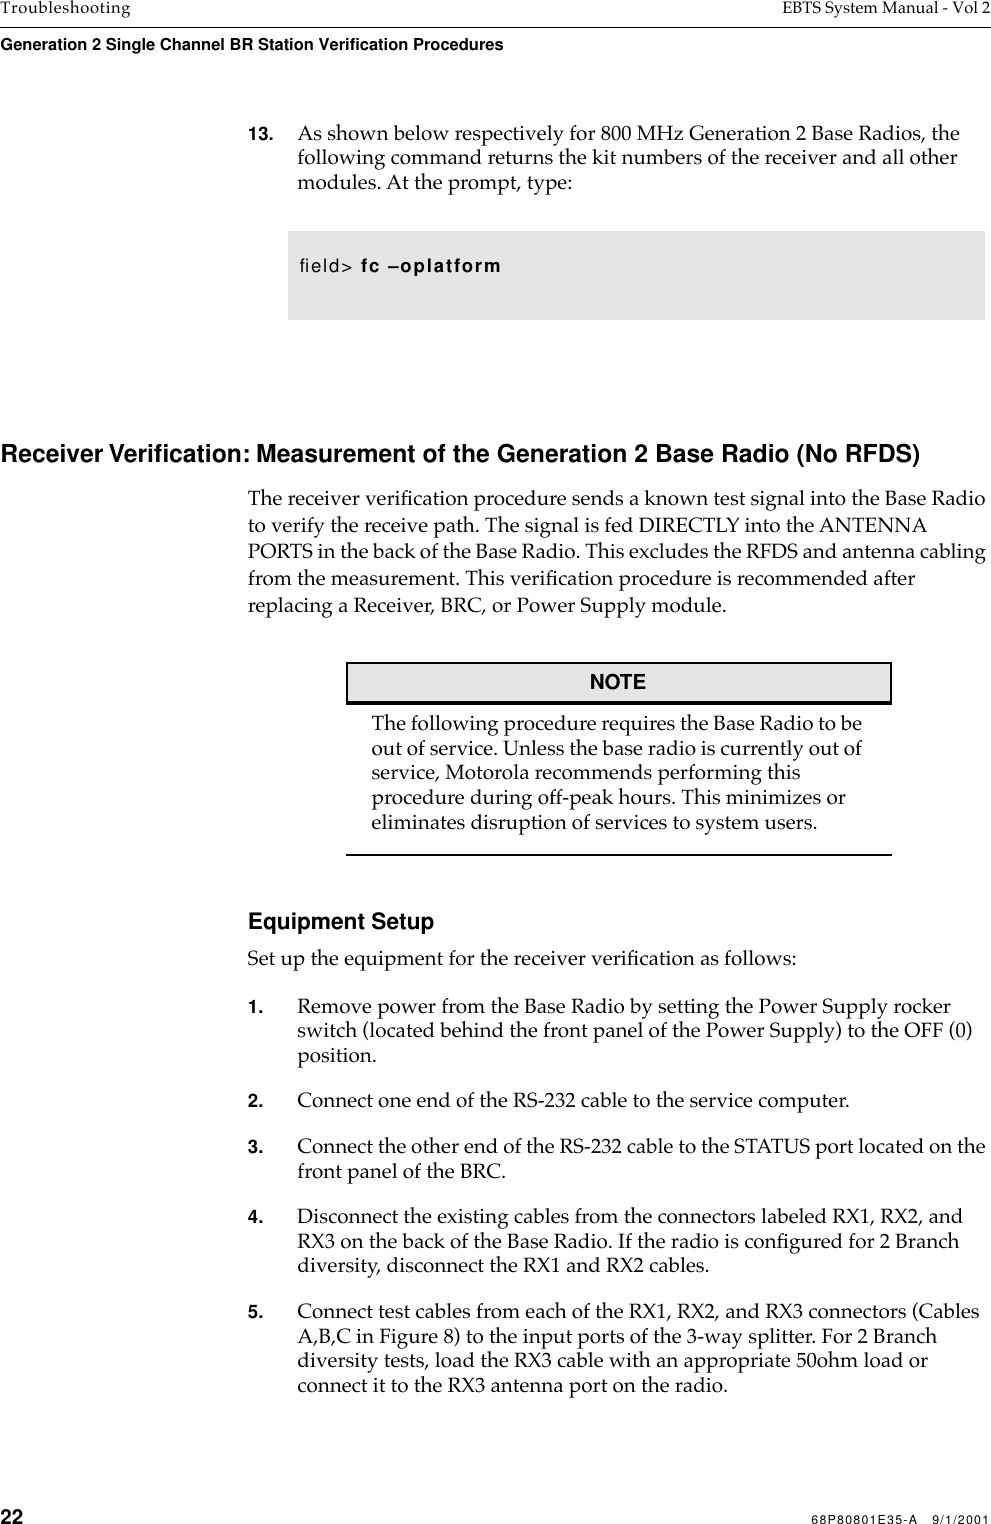 22 68P80801E35-A   9/1/2001Troubleshooting EBTS System Manual - Vol 2Generation 2 Single Channel BR Station Verification Procedures 13. As shown below respectively for 800 MHz Generation 2 Base Radios, the following command returns the kit numbers of the receiver and all other modules. At the prompt, type: Receiver Veriﬁcation: Measurement of the Generation 2 Base Radio (No RFDS)The receiver veriﬁcation procedure sends a known test signal into the Base Radio to verify the receive path. The signal is fed DIRECTLY into the ANTENNA PORTS in the back of the Base Radio. This excludes the RFDS and antenna cabling from the measurement. This veriﬁcation procedure is recommended after replacing a Receiver, BRC, or Power Supply module.NOTEThe following procedure requires the Base Radio to be out of service. Unless the base radio is currently out of service, Motorola recommends performing this procedure during off-peak hours. This minimizes or eliminates disruption of services to system users.Equipment SetupSet up the equipment for the receiver veriﬁcation as follows:1. Remove power from the Base Radio by setting the Power Supply rocker switch (located behind the front panel of the Power Supply) to the OFF (0) position.2. Connect one end of the RS-232 cable to the service computer.3. Connect the other end of the RS-232 cable to the STATUS port located on the front panel of the BRC. 4. Disconnect the existing cables from the connectors labeled RX1, RX2, and RX3 on the back of the Base Radio. If the radio is conﬁgured for 2 Branch diversity, disconnect the RX1 and RX2 cables. 5. Connect test cables from each of the RX1, RX2, and RX3 connectors (Cables A,B,C in Figure 8) to the input ports of the 3-way splitter. For 2 Branch diversity tests, load the RX3 cable with an appropriate 50ohm load or connect it to the RX3 antenna port on the radio.ﬁeld&gt; fc –oplatform